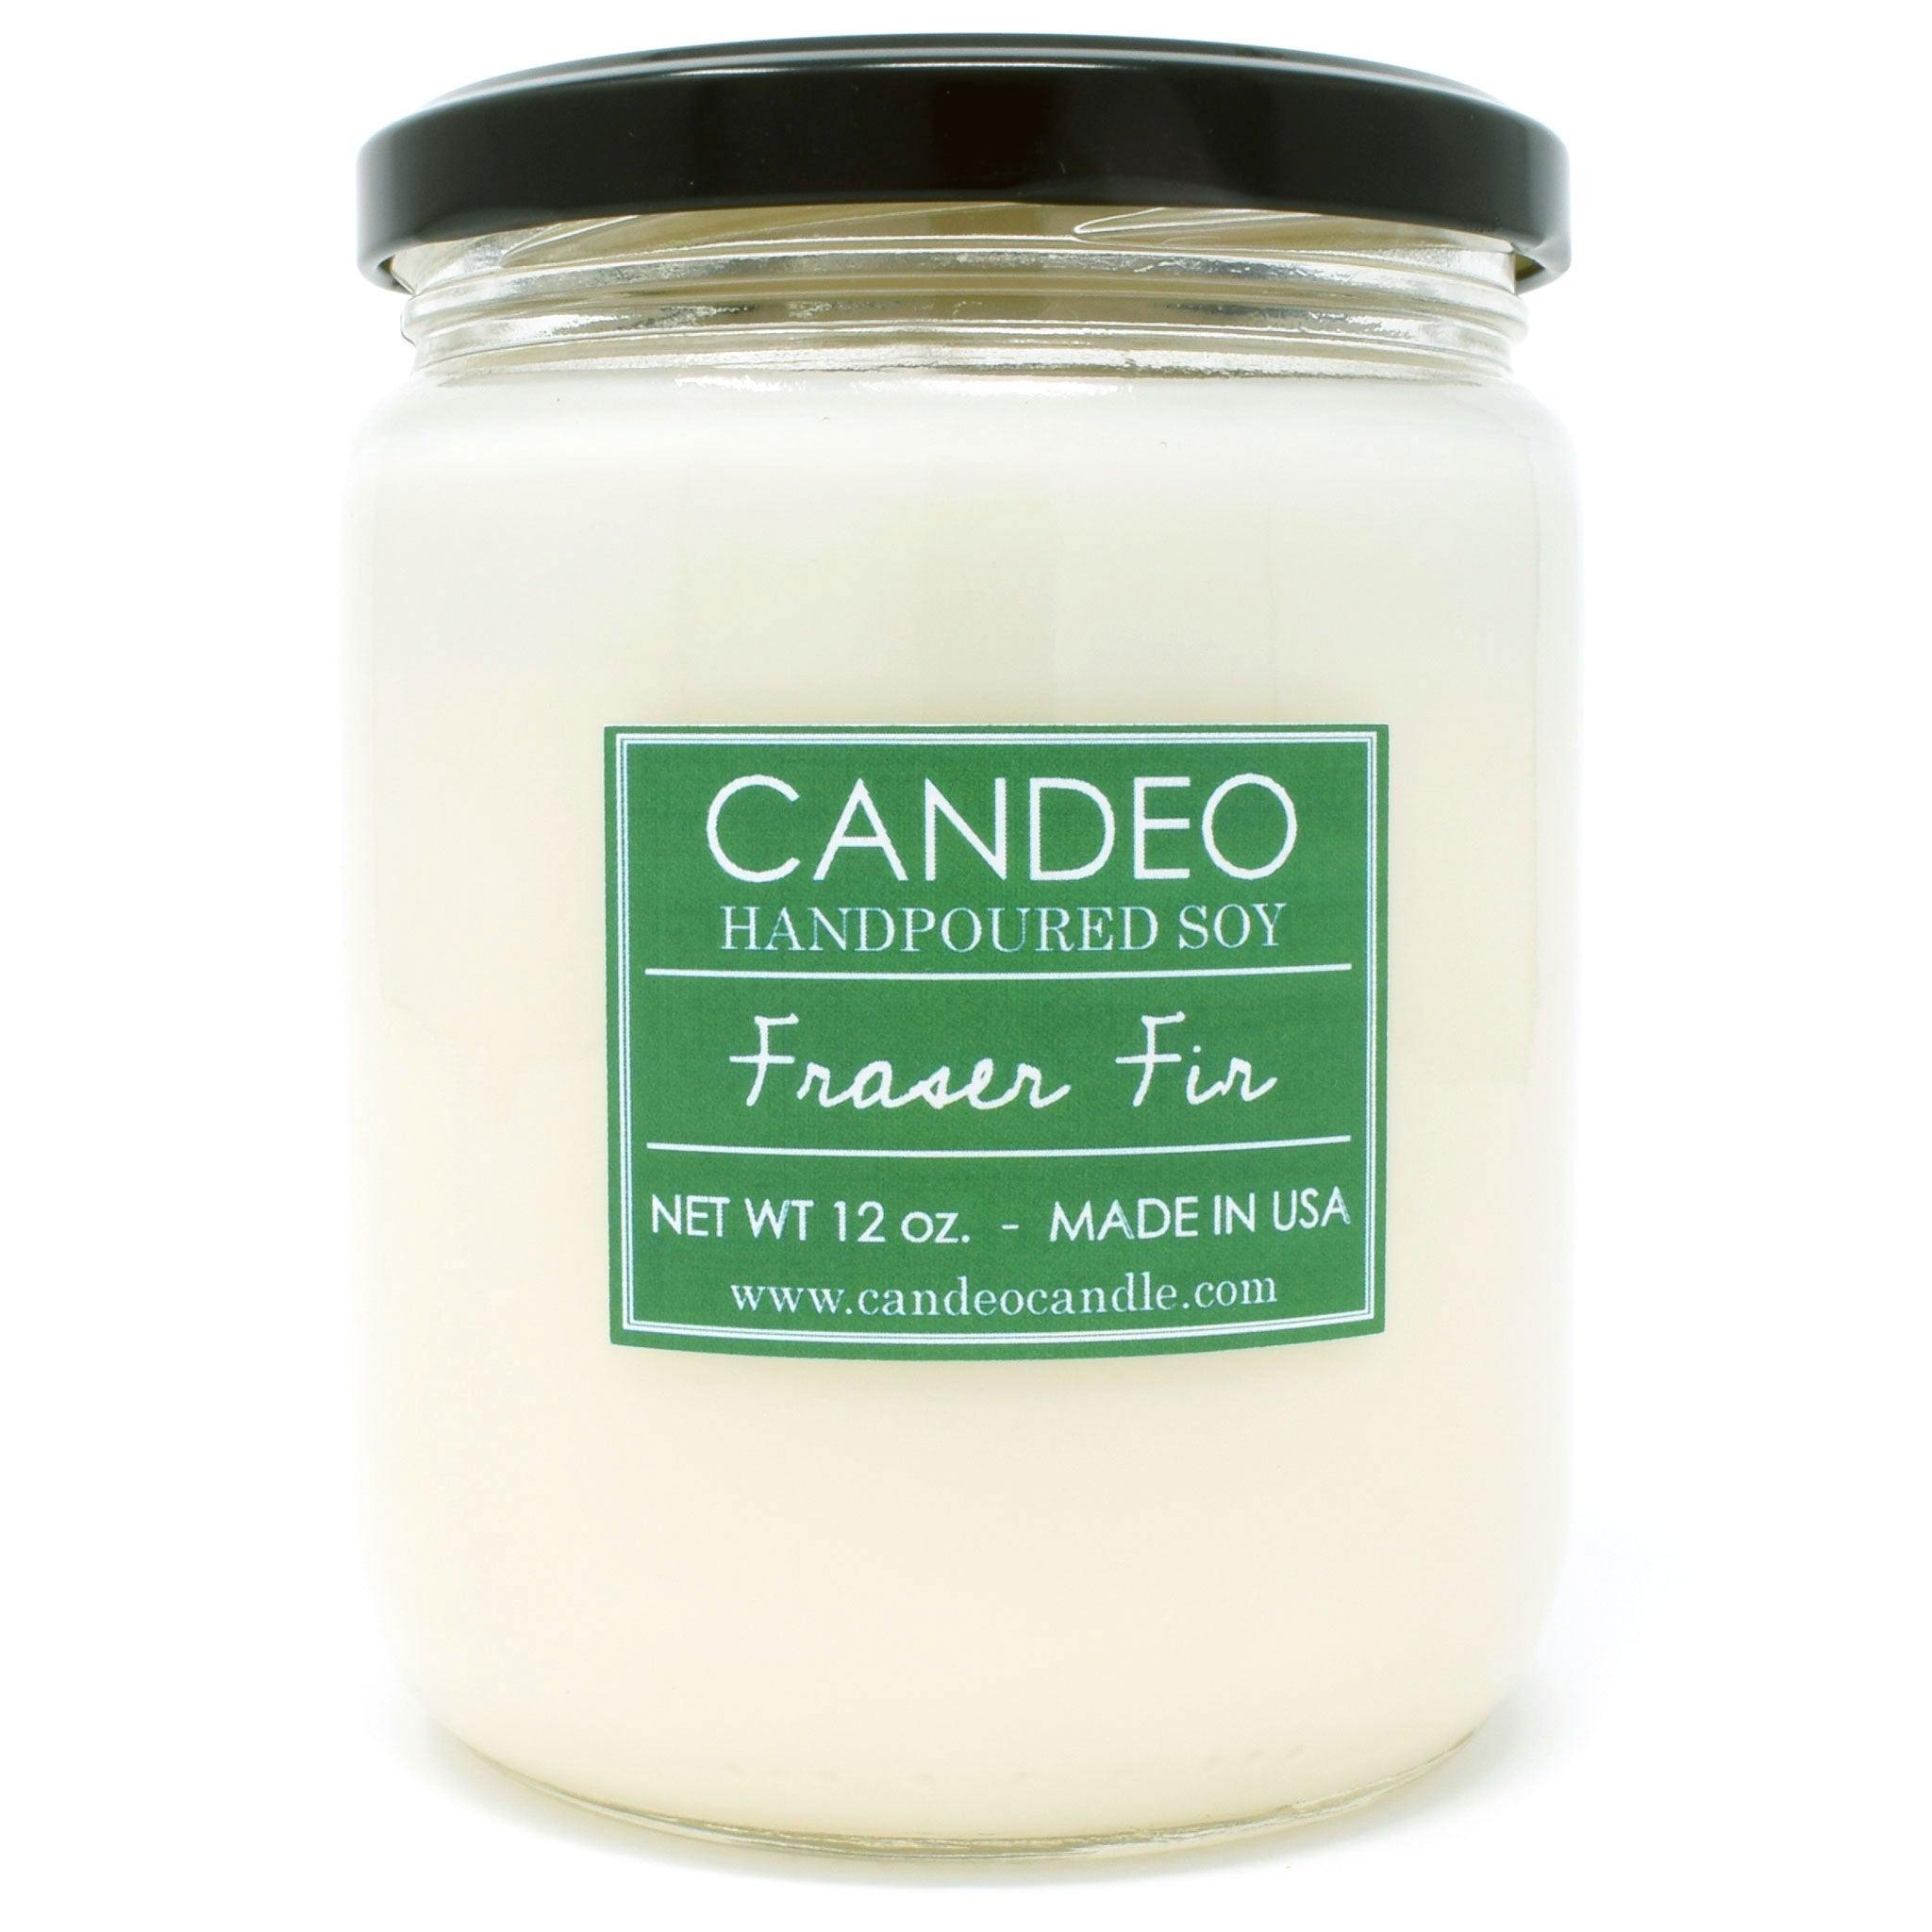 Fraser Fir, 14oz Soy Candle Jar - Candeo Candle